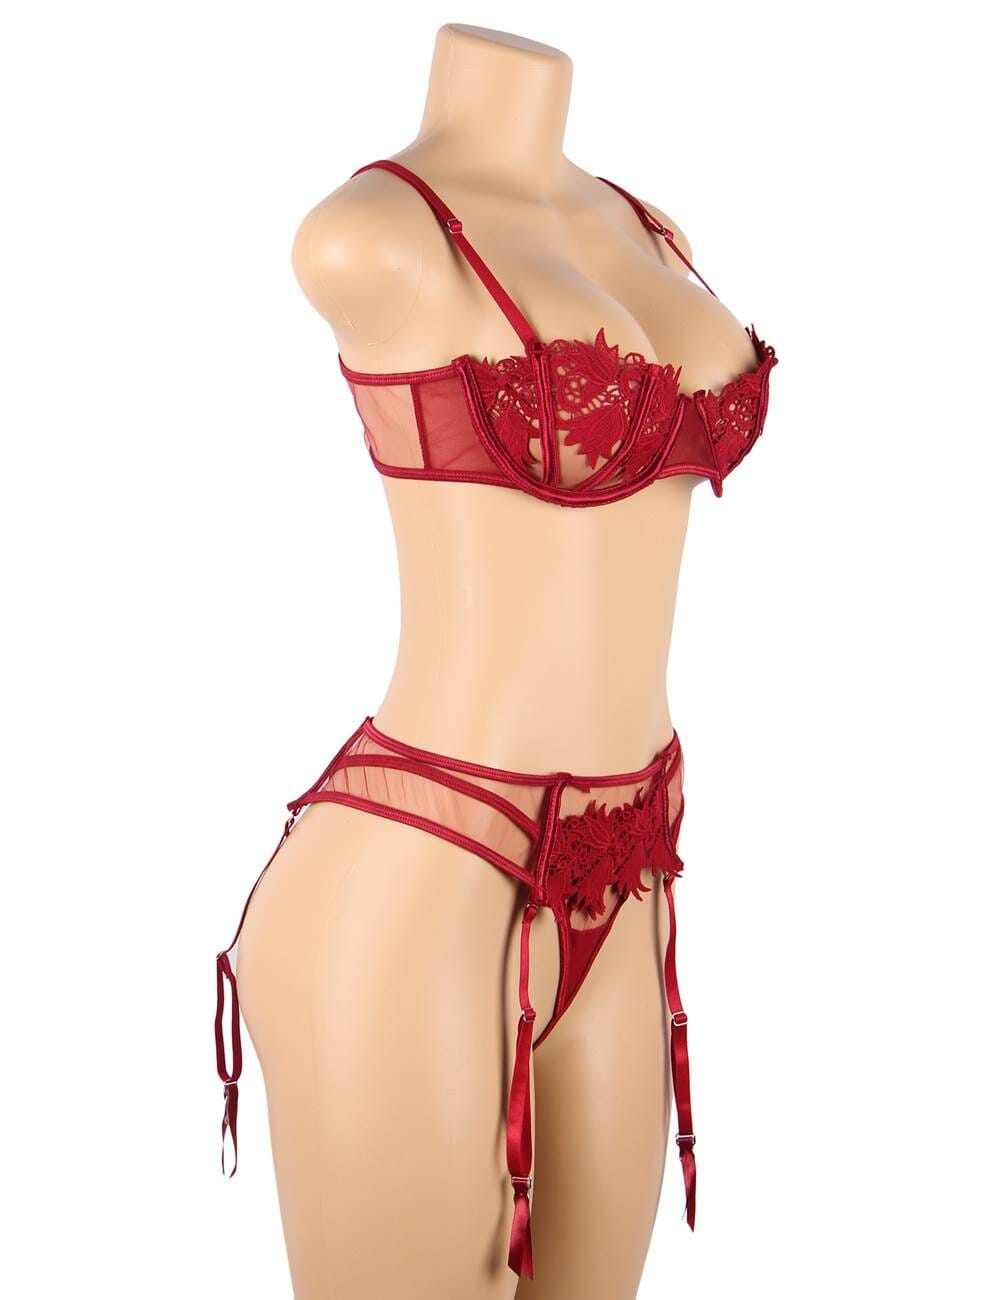 a female mannequin wearing a red lingerie